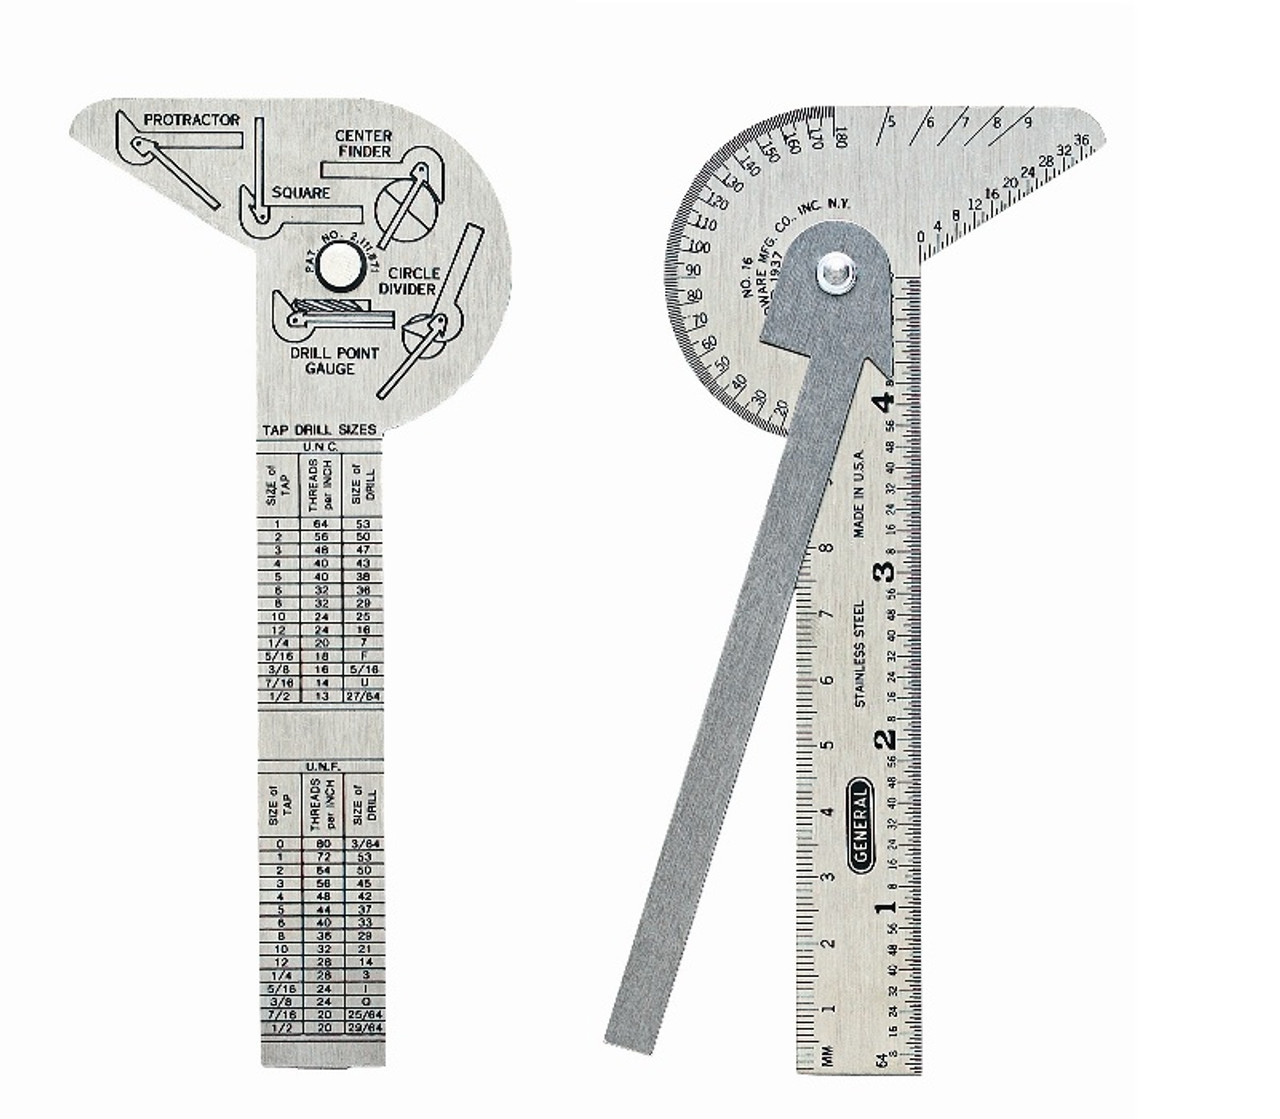 General ANGLE-IZER Pocket-Sized 6-In-1 Multi Use Ruler/Gauge with 4" Ruler, Etched Graduations in 64ths of an Inch and Millimeters 16ME